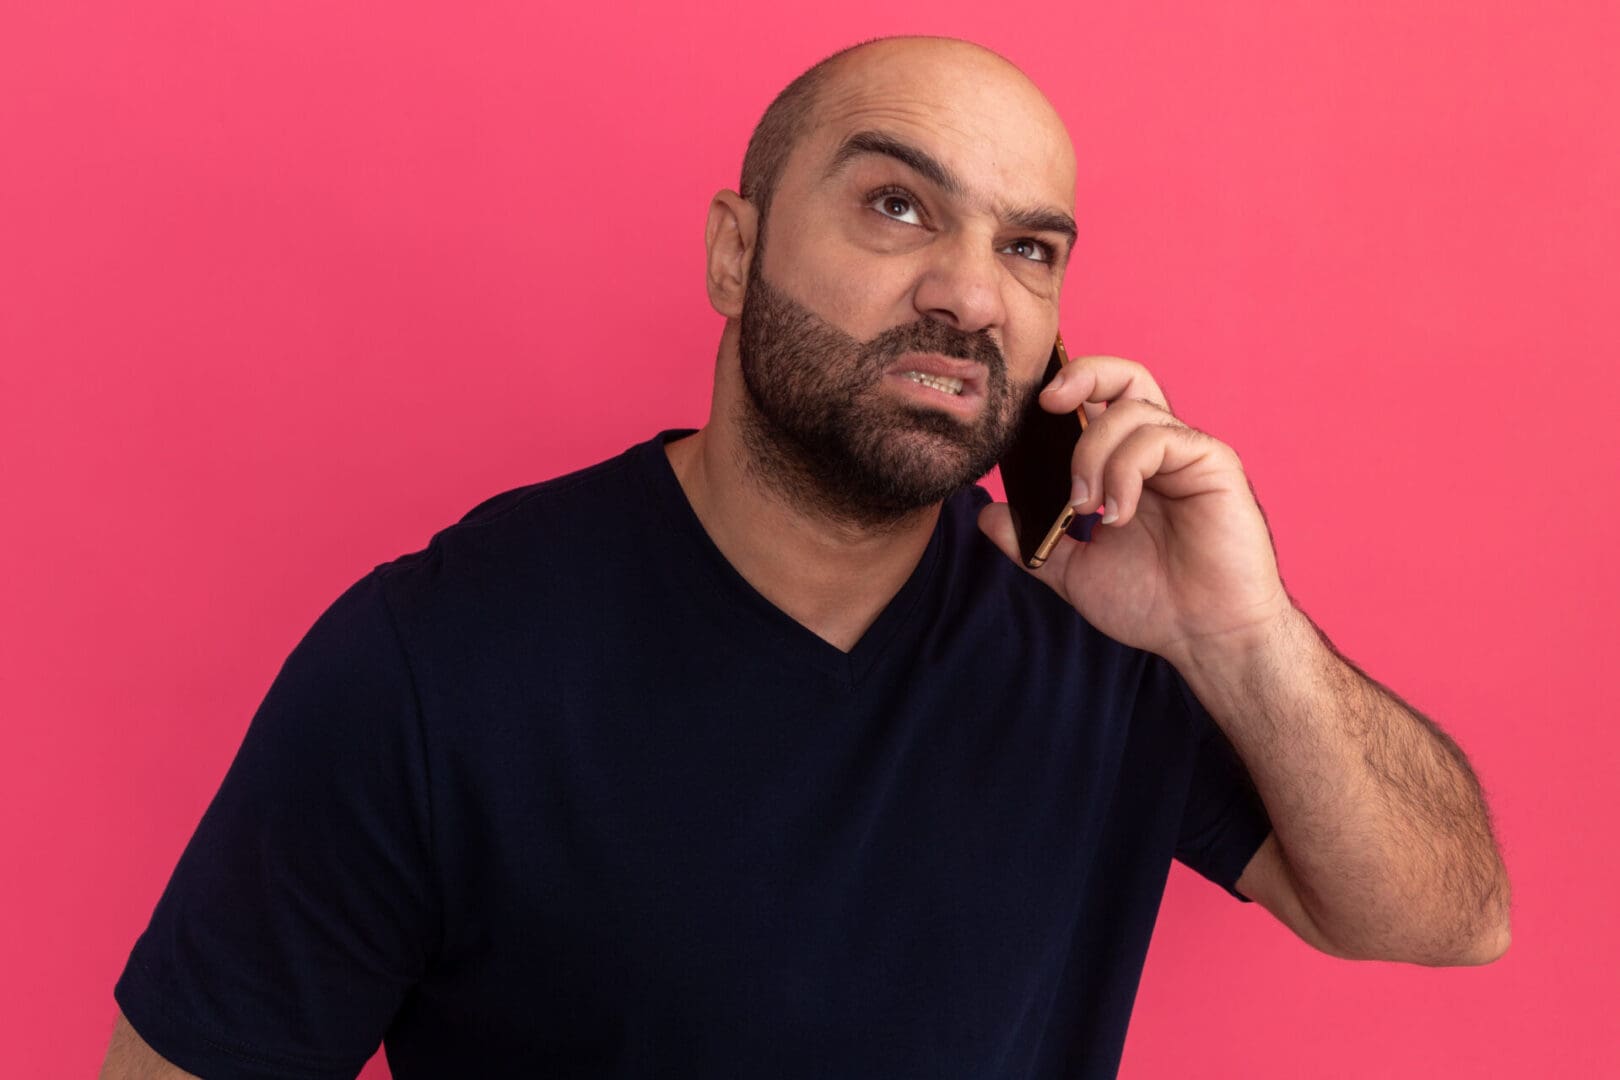 Man with a skeptical expression talking about trigger leads on the phone against a pink background.